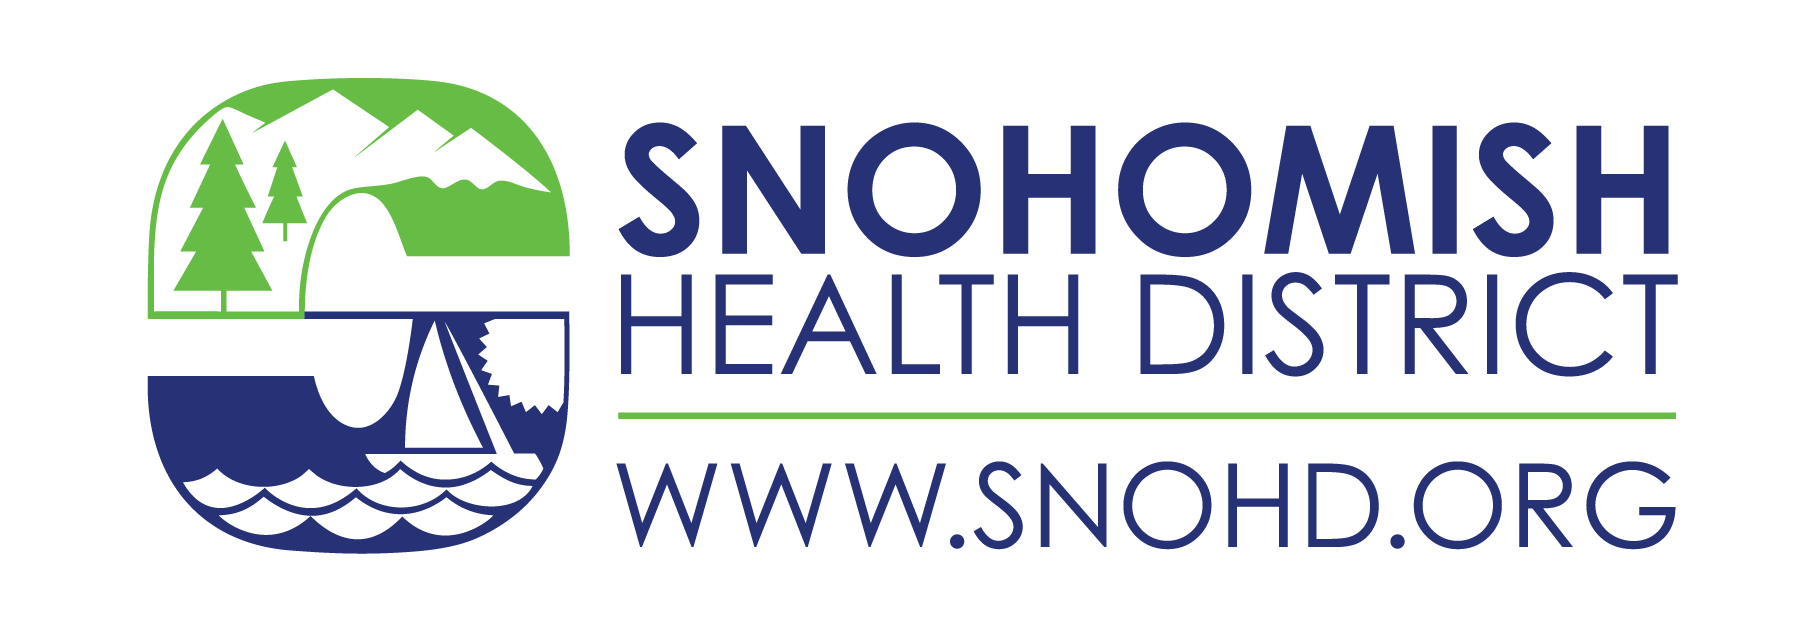 Snohomish Health District Testing Site - Snohomish Health District Mobile Testing Site Logo